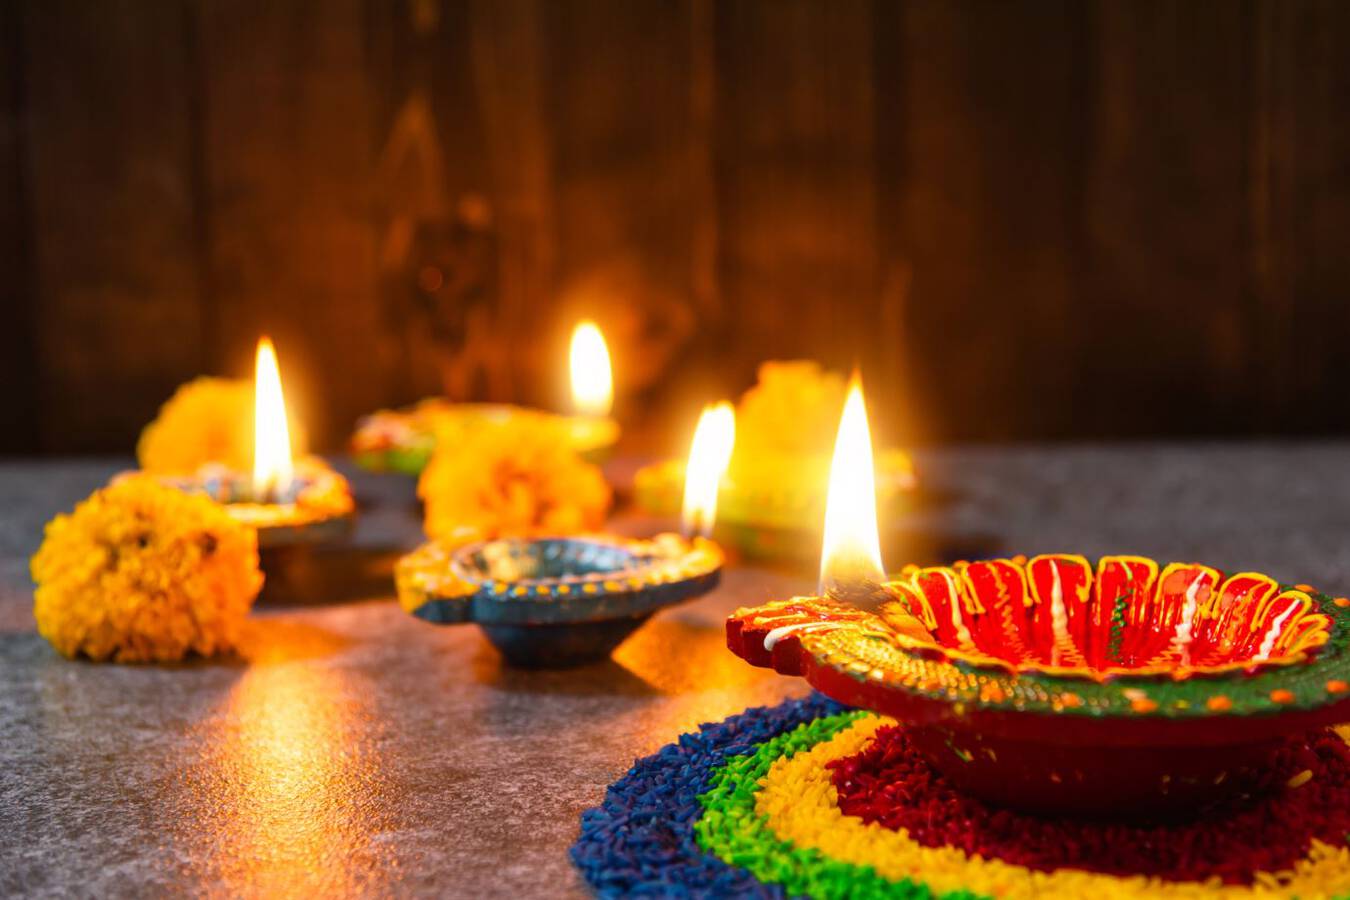 Happy Diwali - have a colourful time!